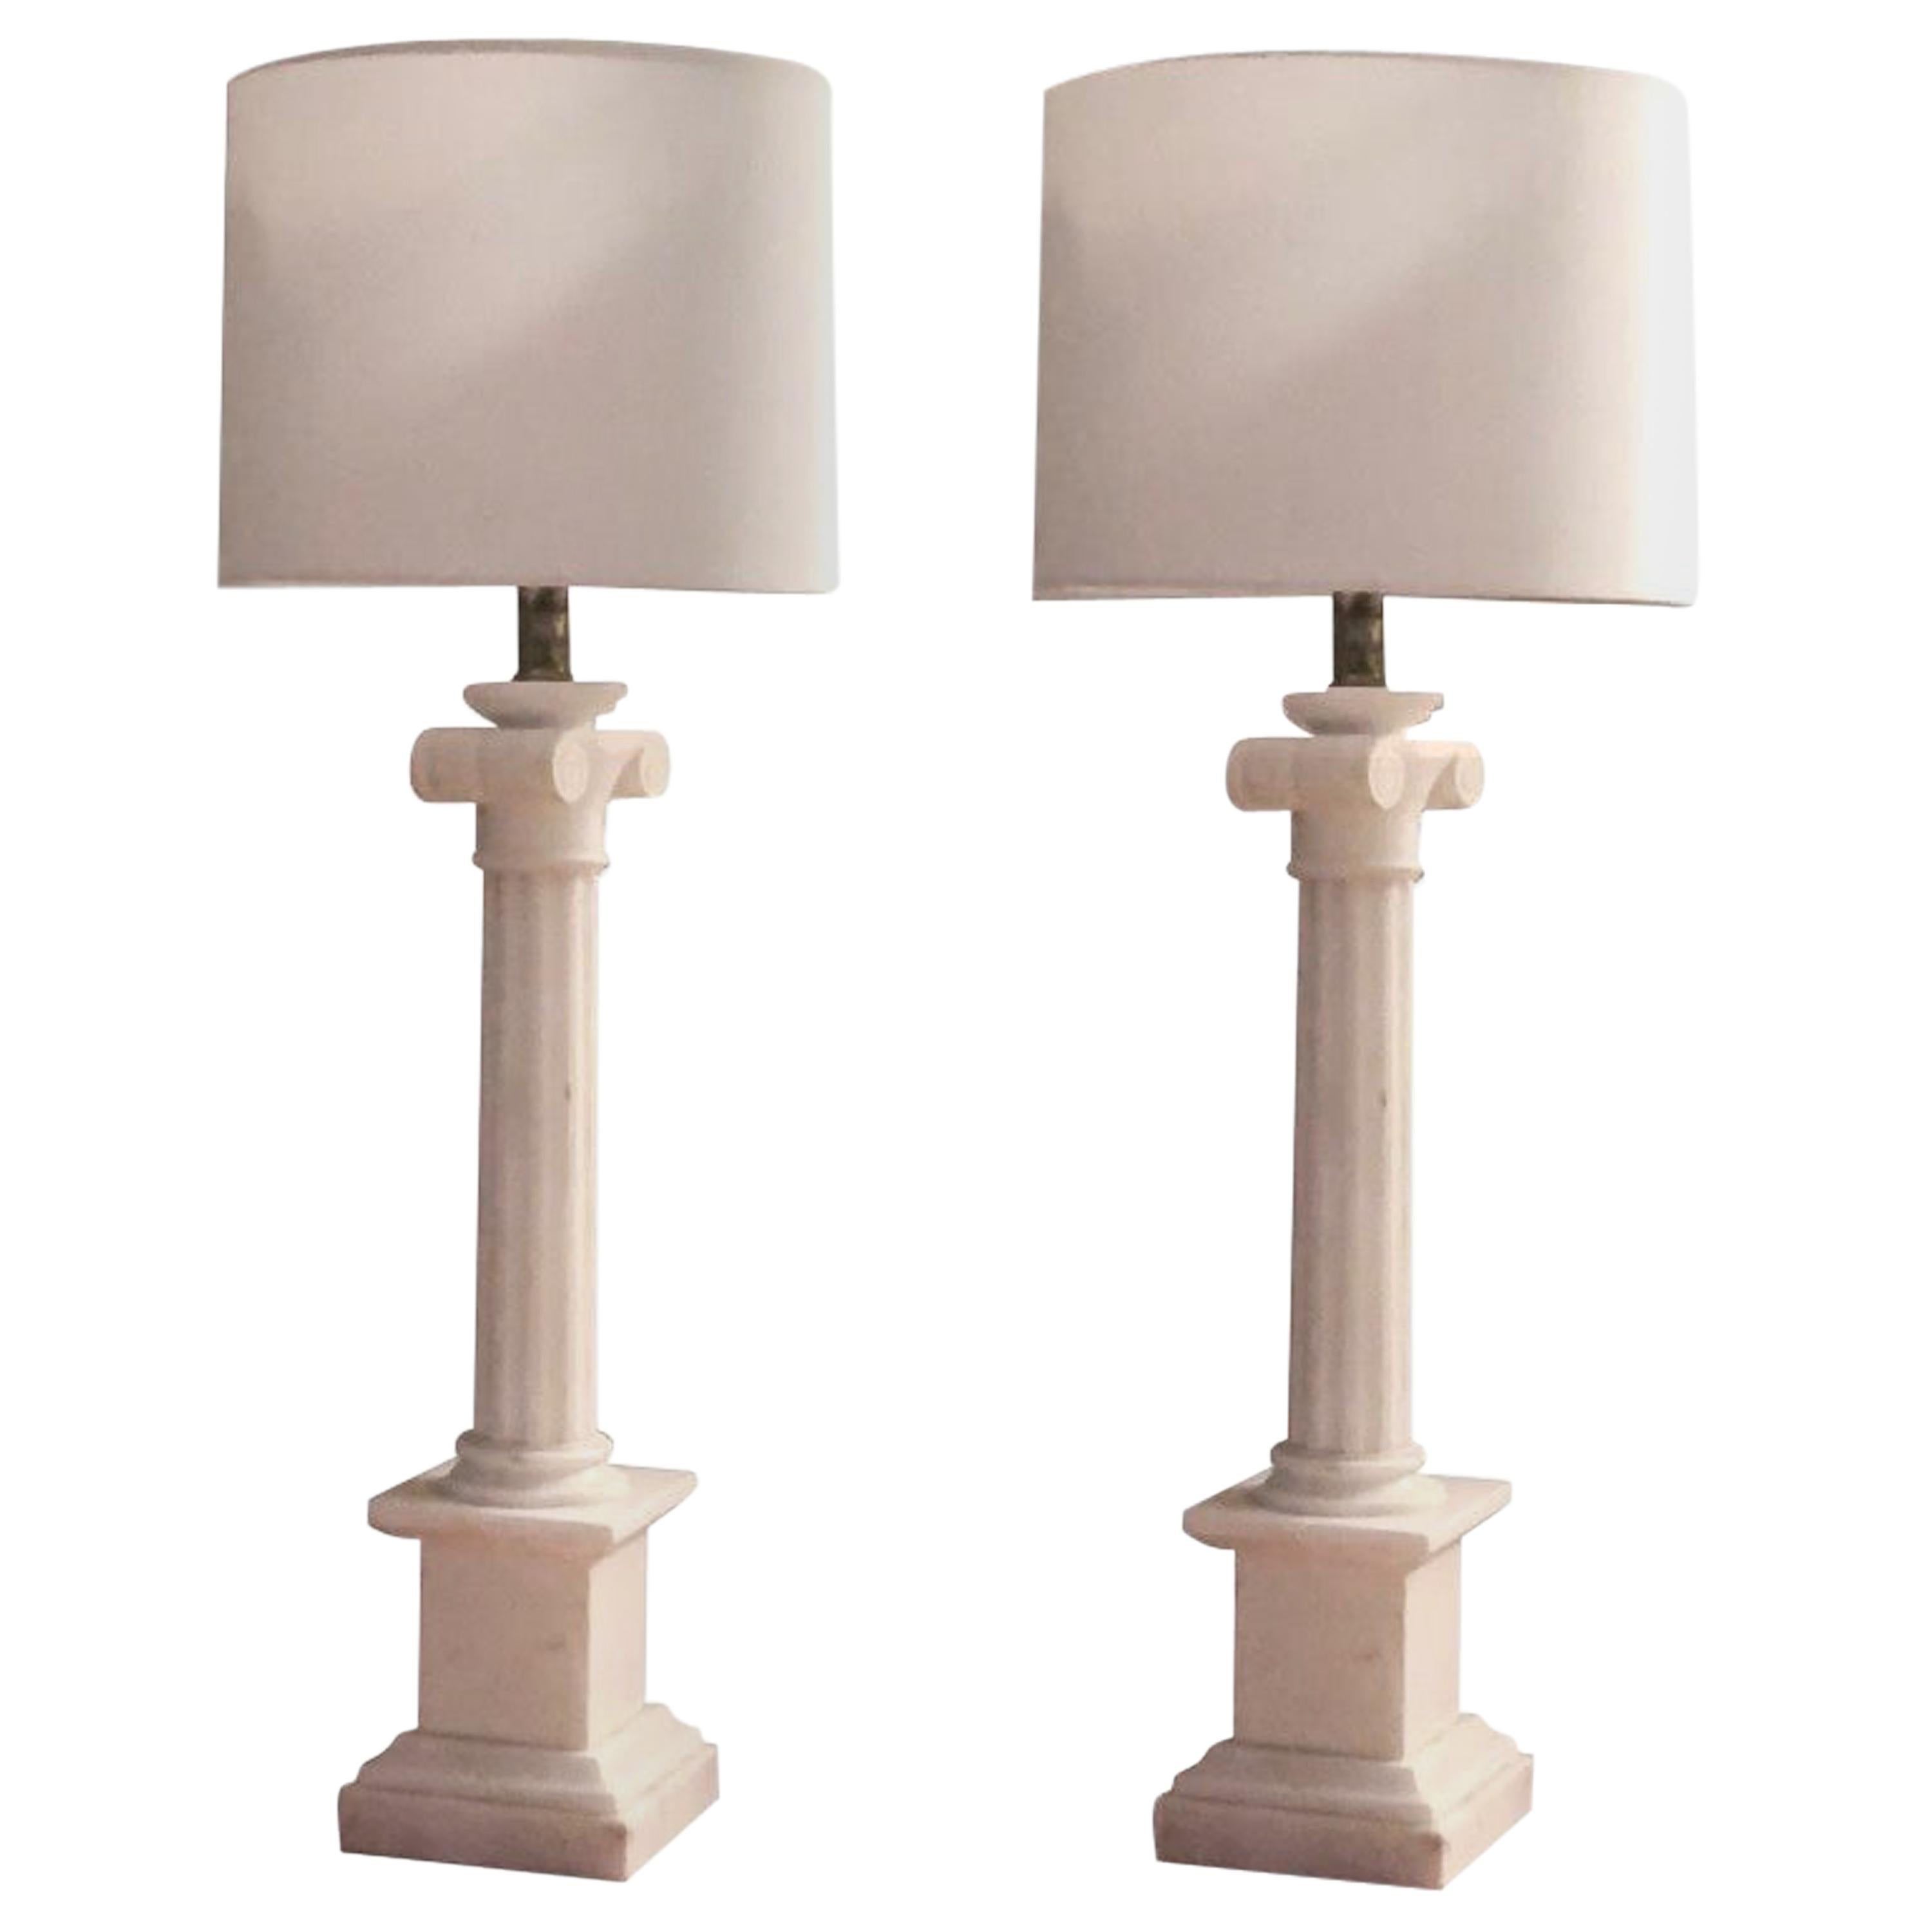 Midcentury Neoclassical White Marble Ionic Column Table Lamp, 1960s Marbro Lamp